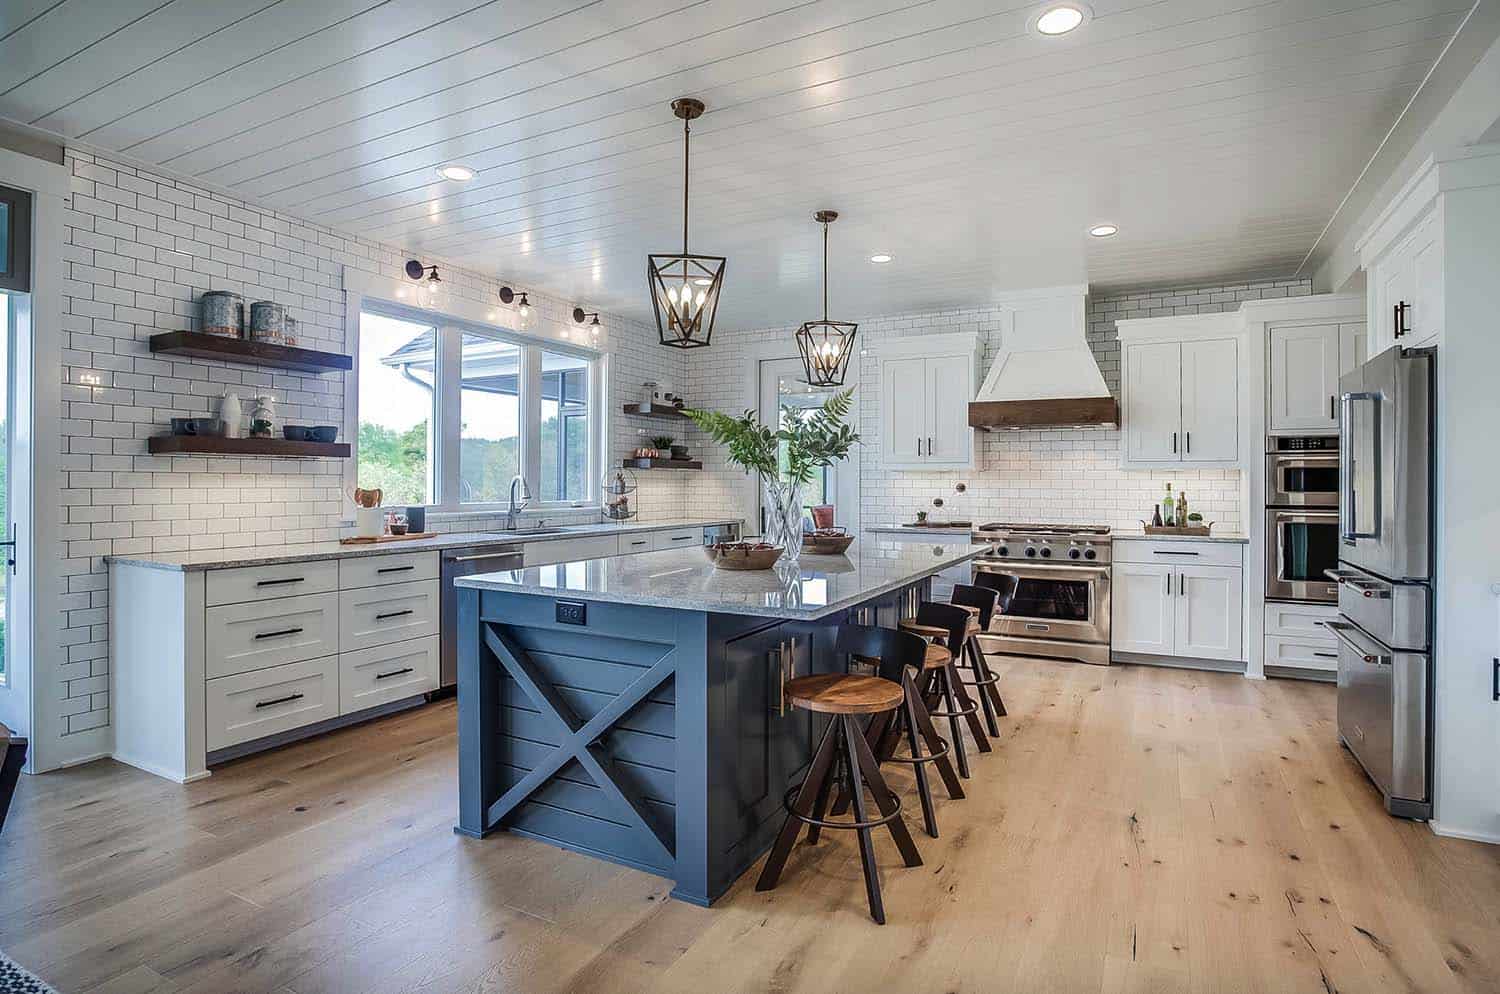 blue kitchen island with white wood cabinets, wood detail on range hood, pine floors, oil rubbed bronze lantern pendant lights about island